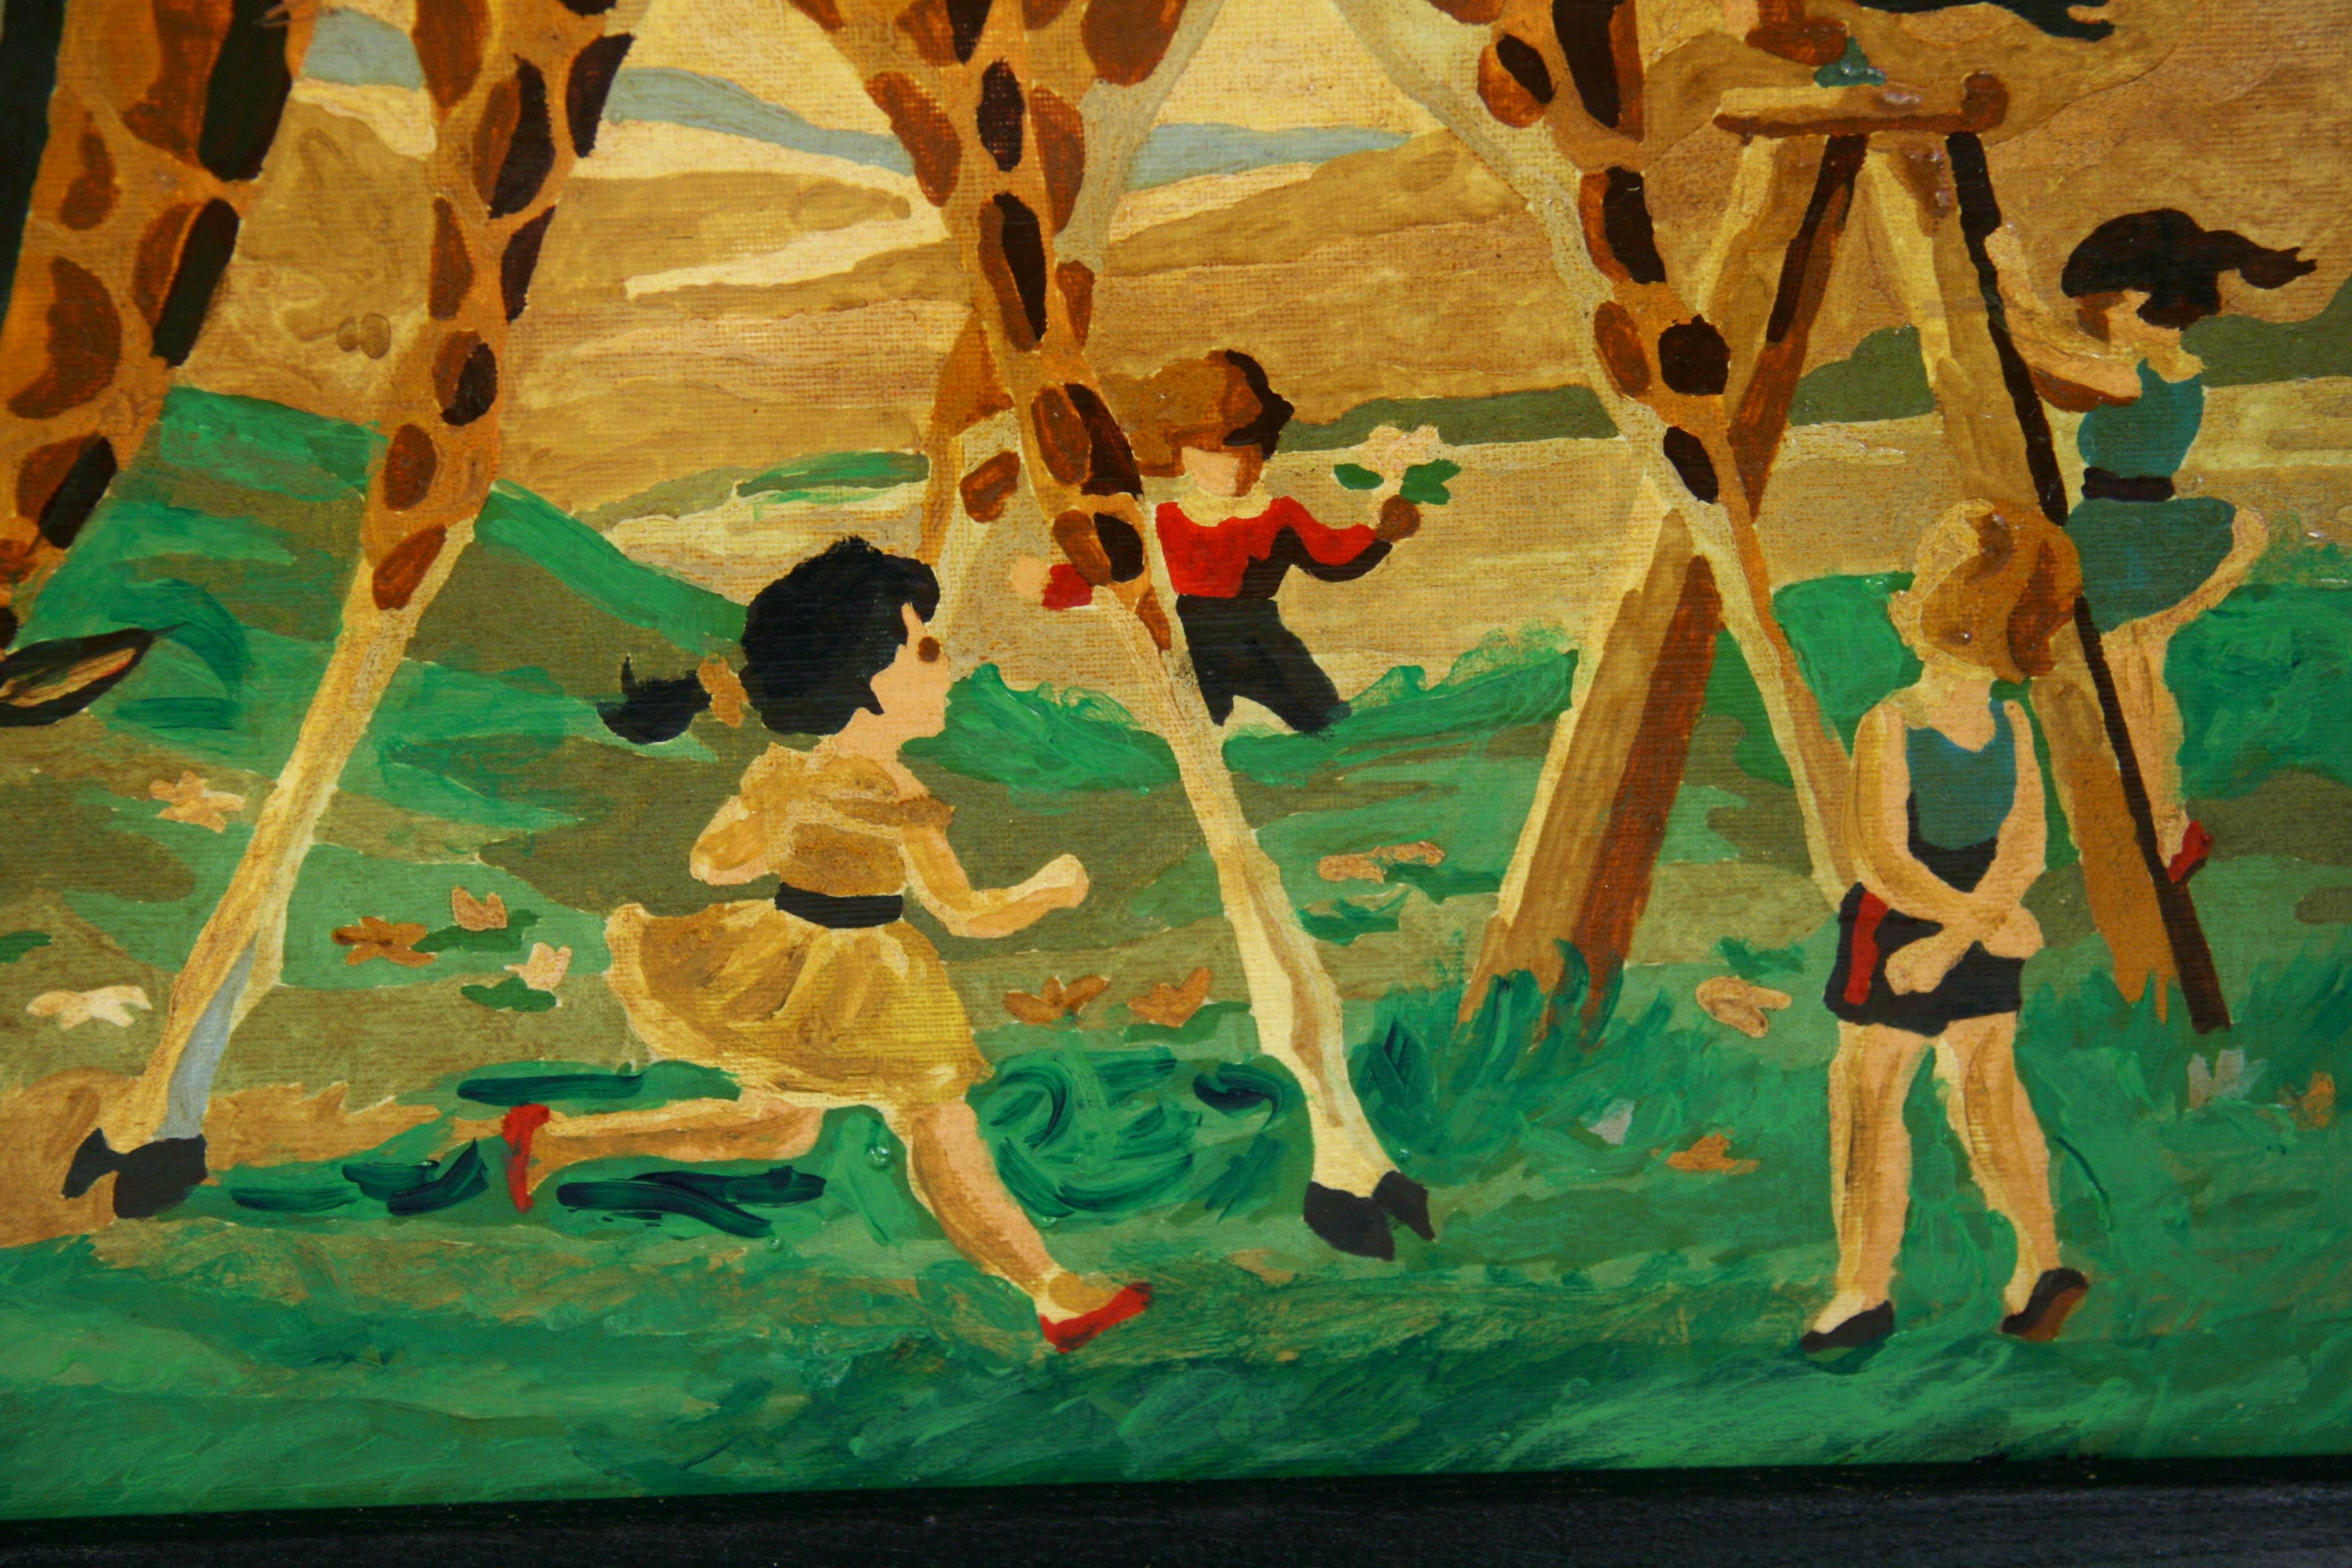 Riding a Giraffe Surreal  Oil Painting 1956 For Sale 7